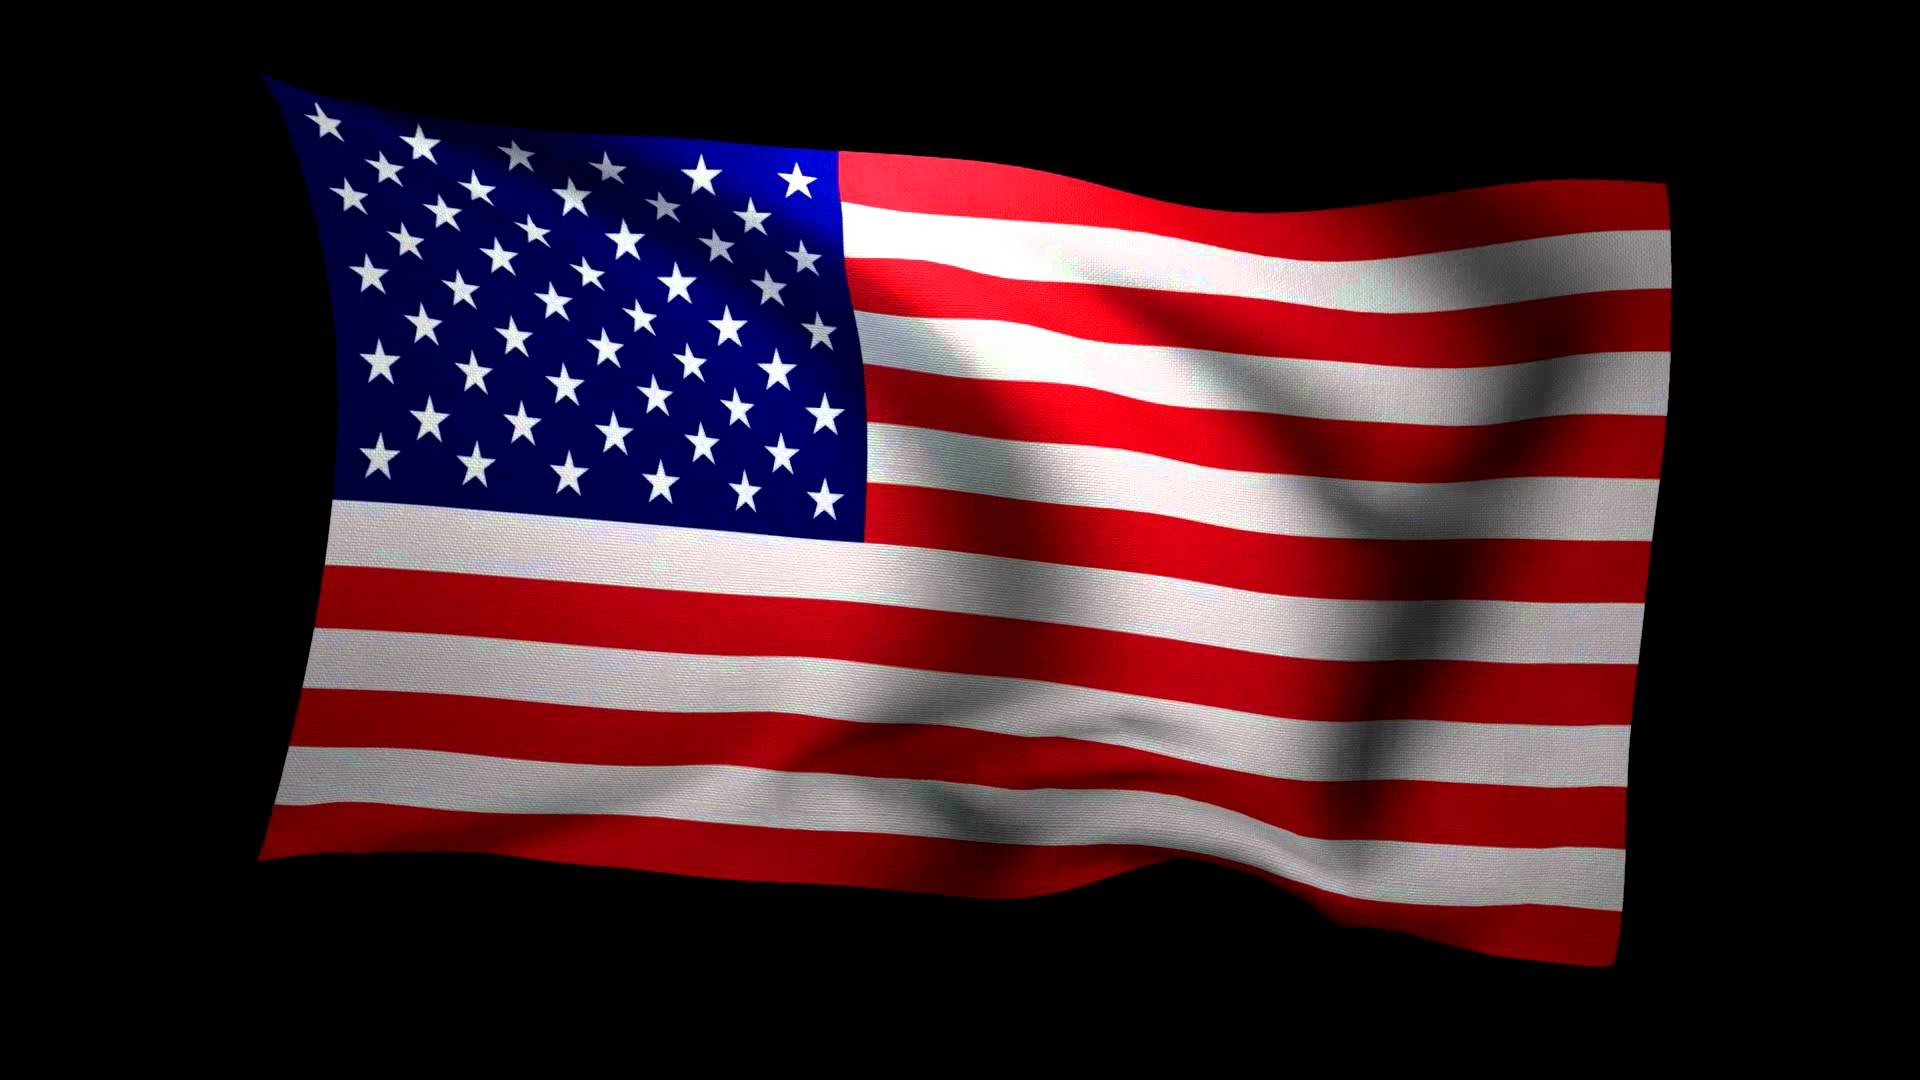 1920x1080 3D Rendering of the flag of the United States waving in the wind